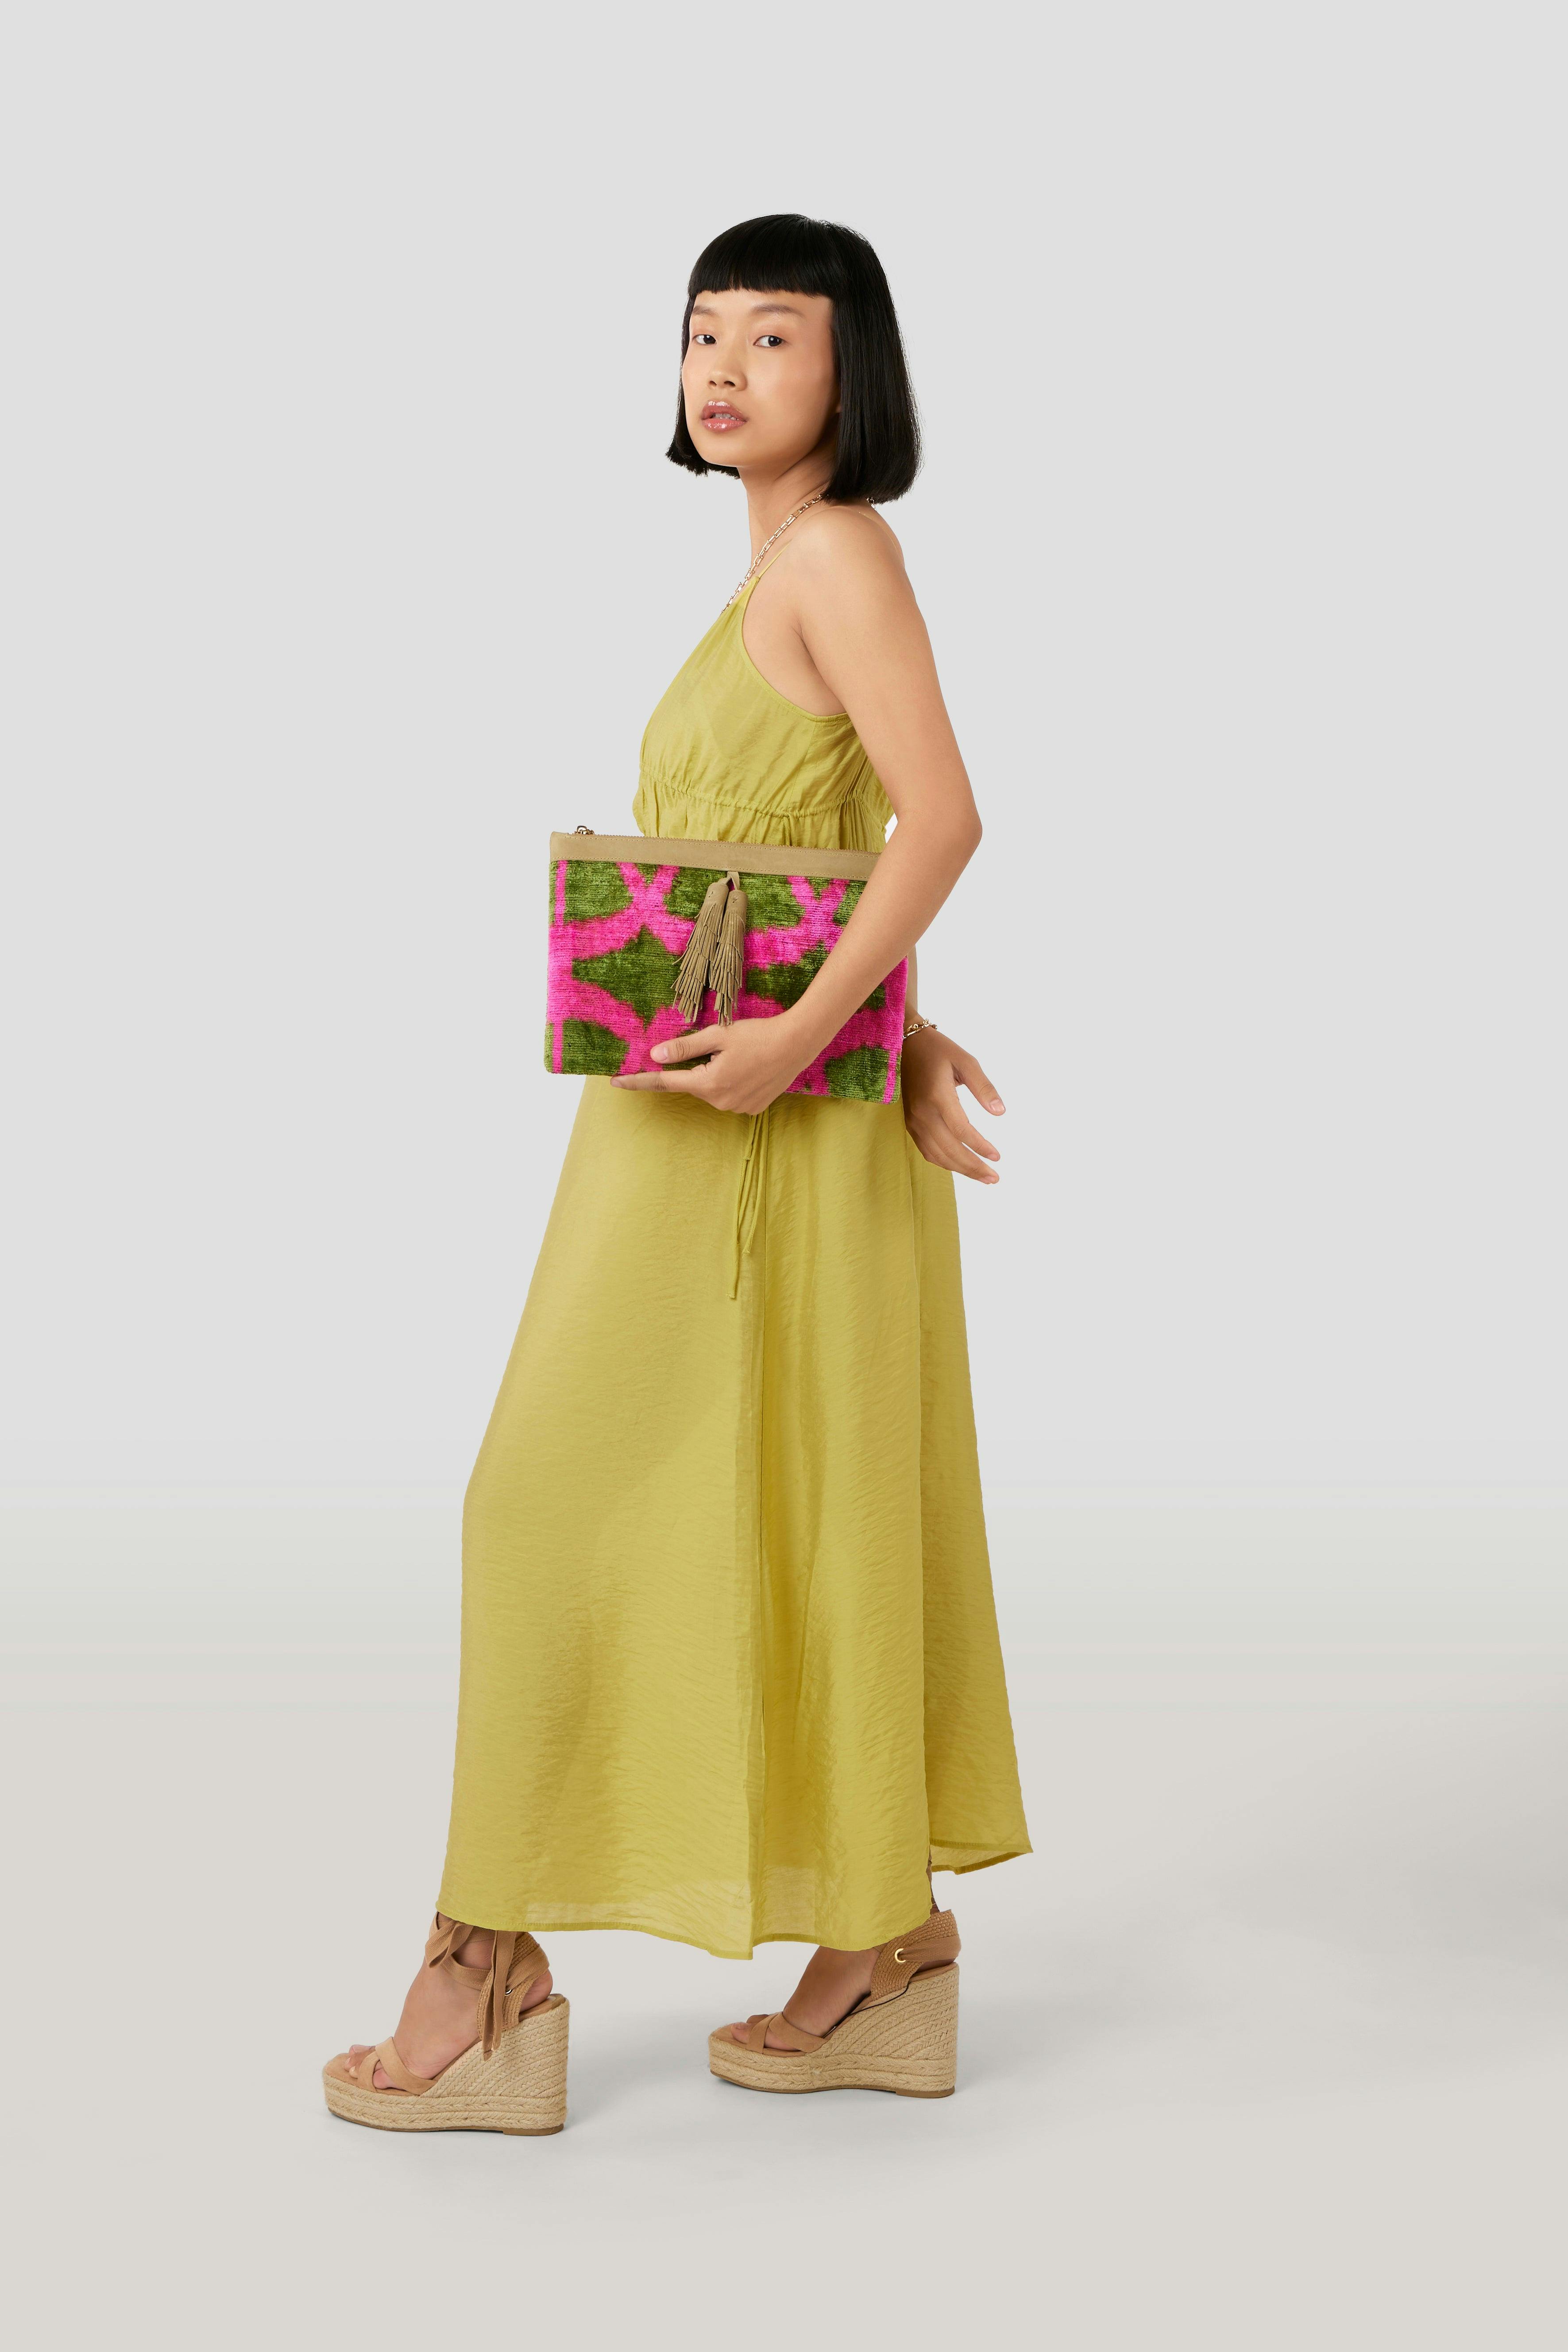 Green & Pink Flat Clutch With Tassel, a product by JENA